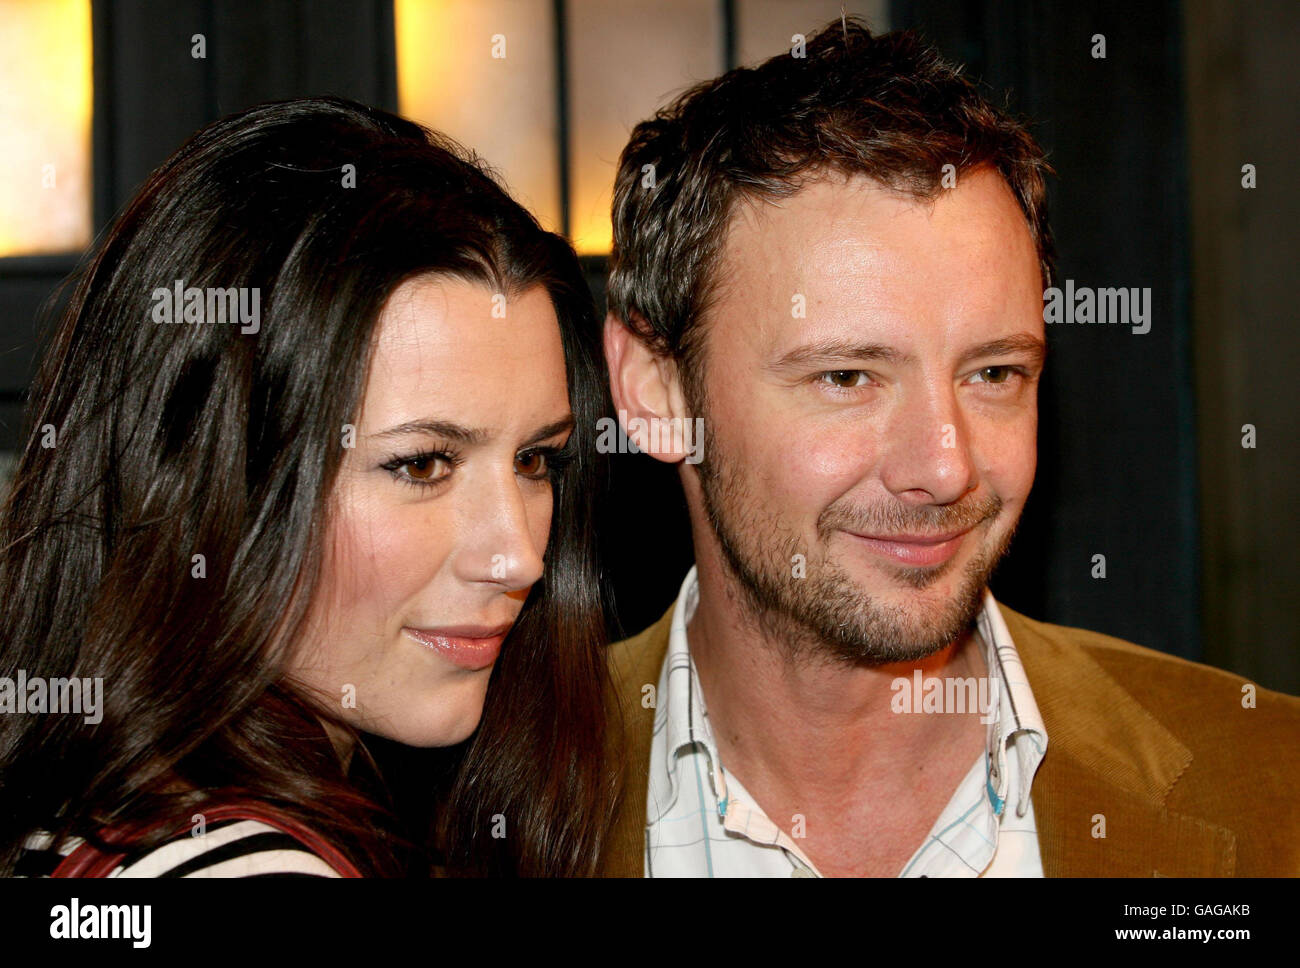 John Simm and his wife Kate Magowan arrive for the Gala Screening of the Doctor Who Christmas espisode ('Voyage of the Damned', TX: BBC One, Christmas Day, Tuesday December 25, 2007 @ 1850) at The Science Museum in west London. Stock Photo